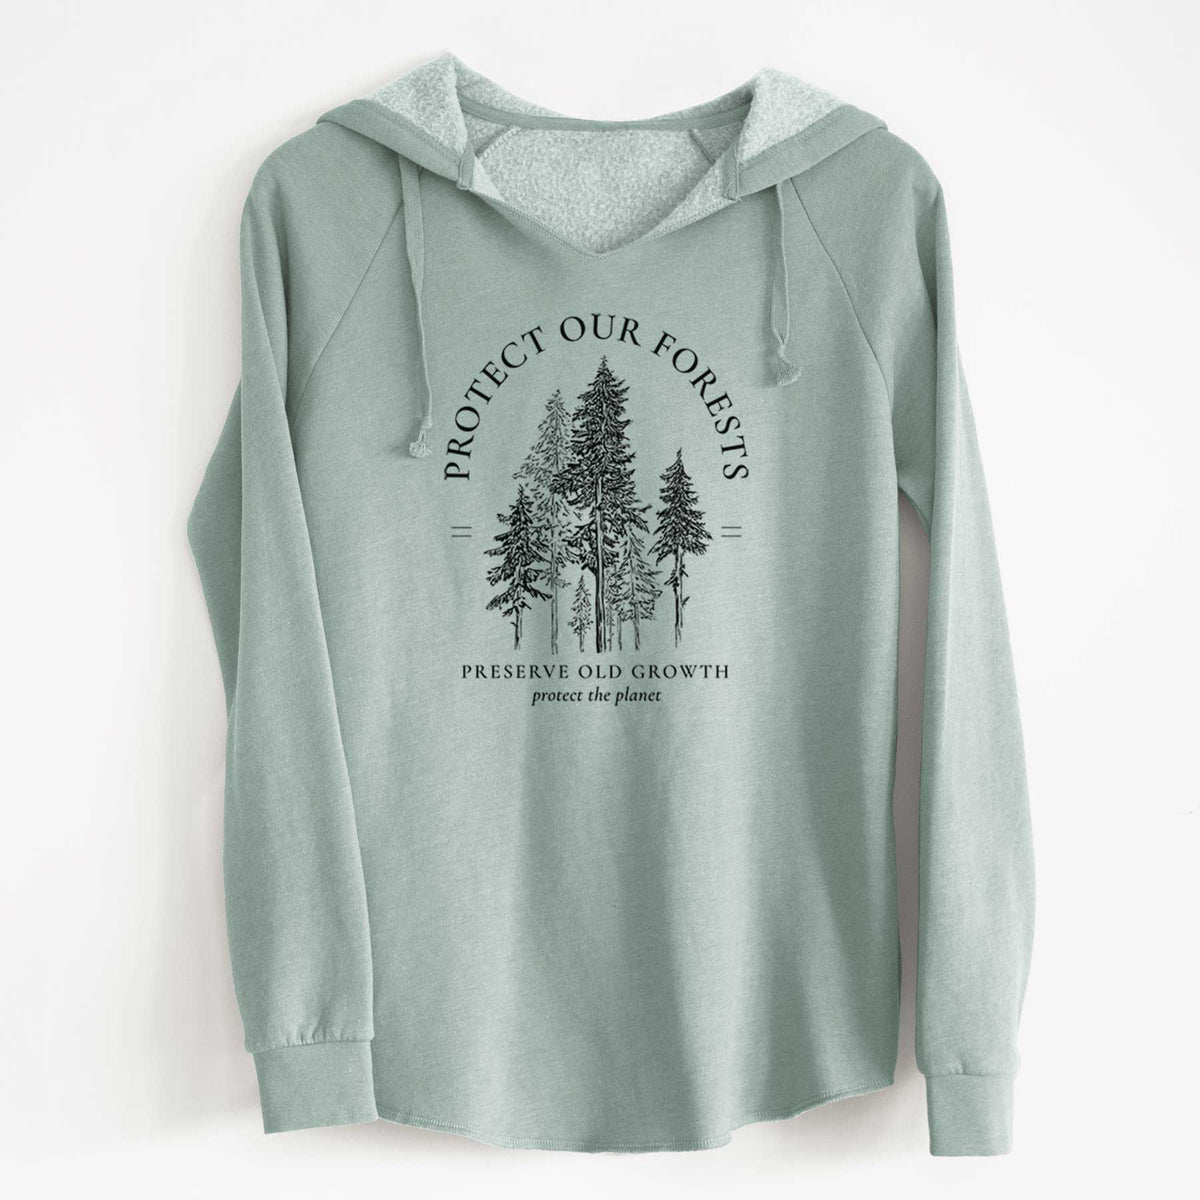 Protect our Forests - Preserve Old Growth - Cali Wave Hooded Sweatshirt